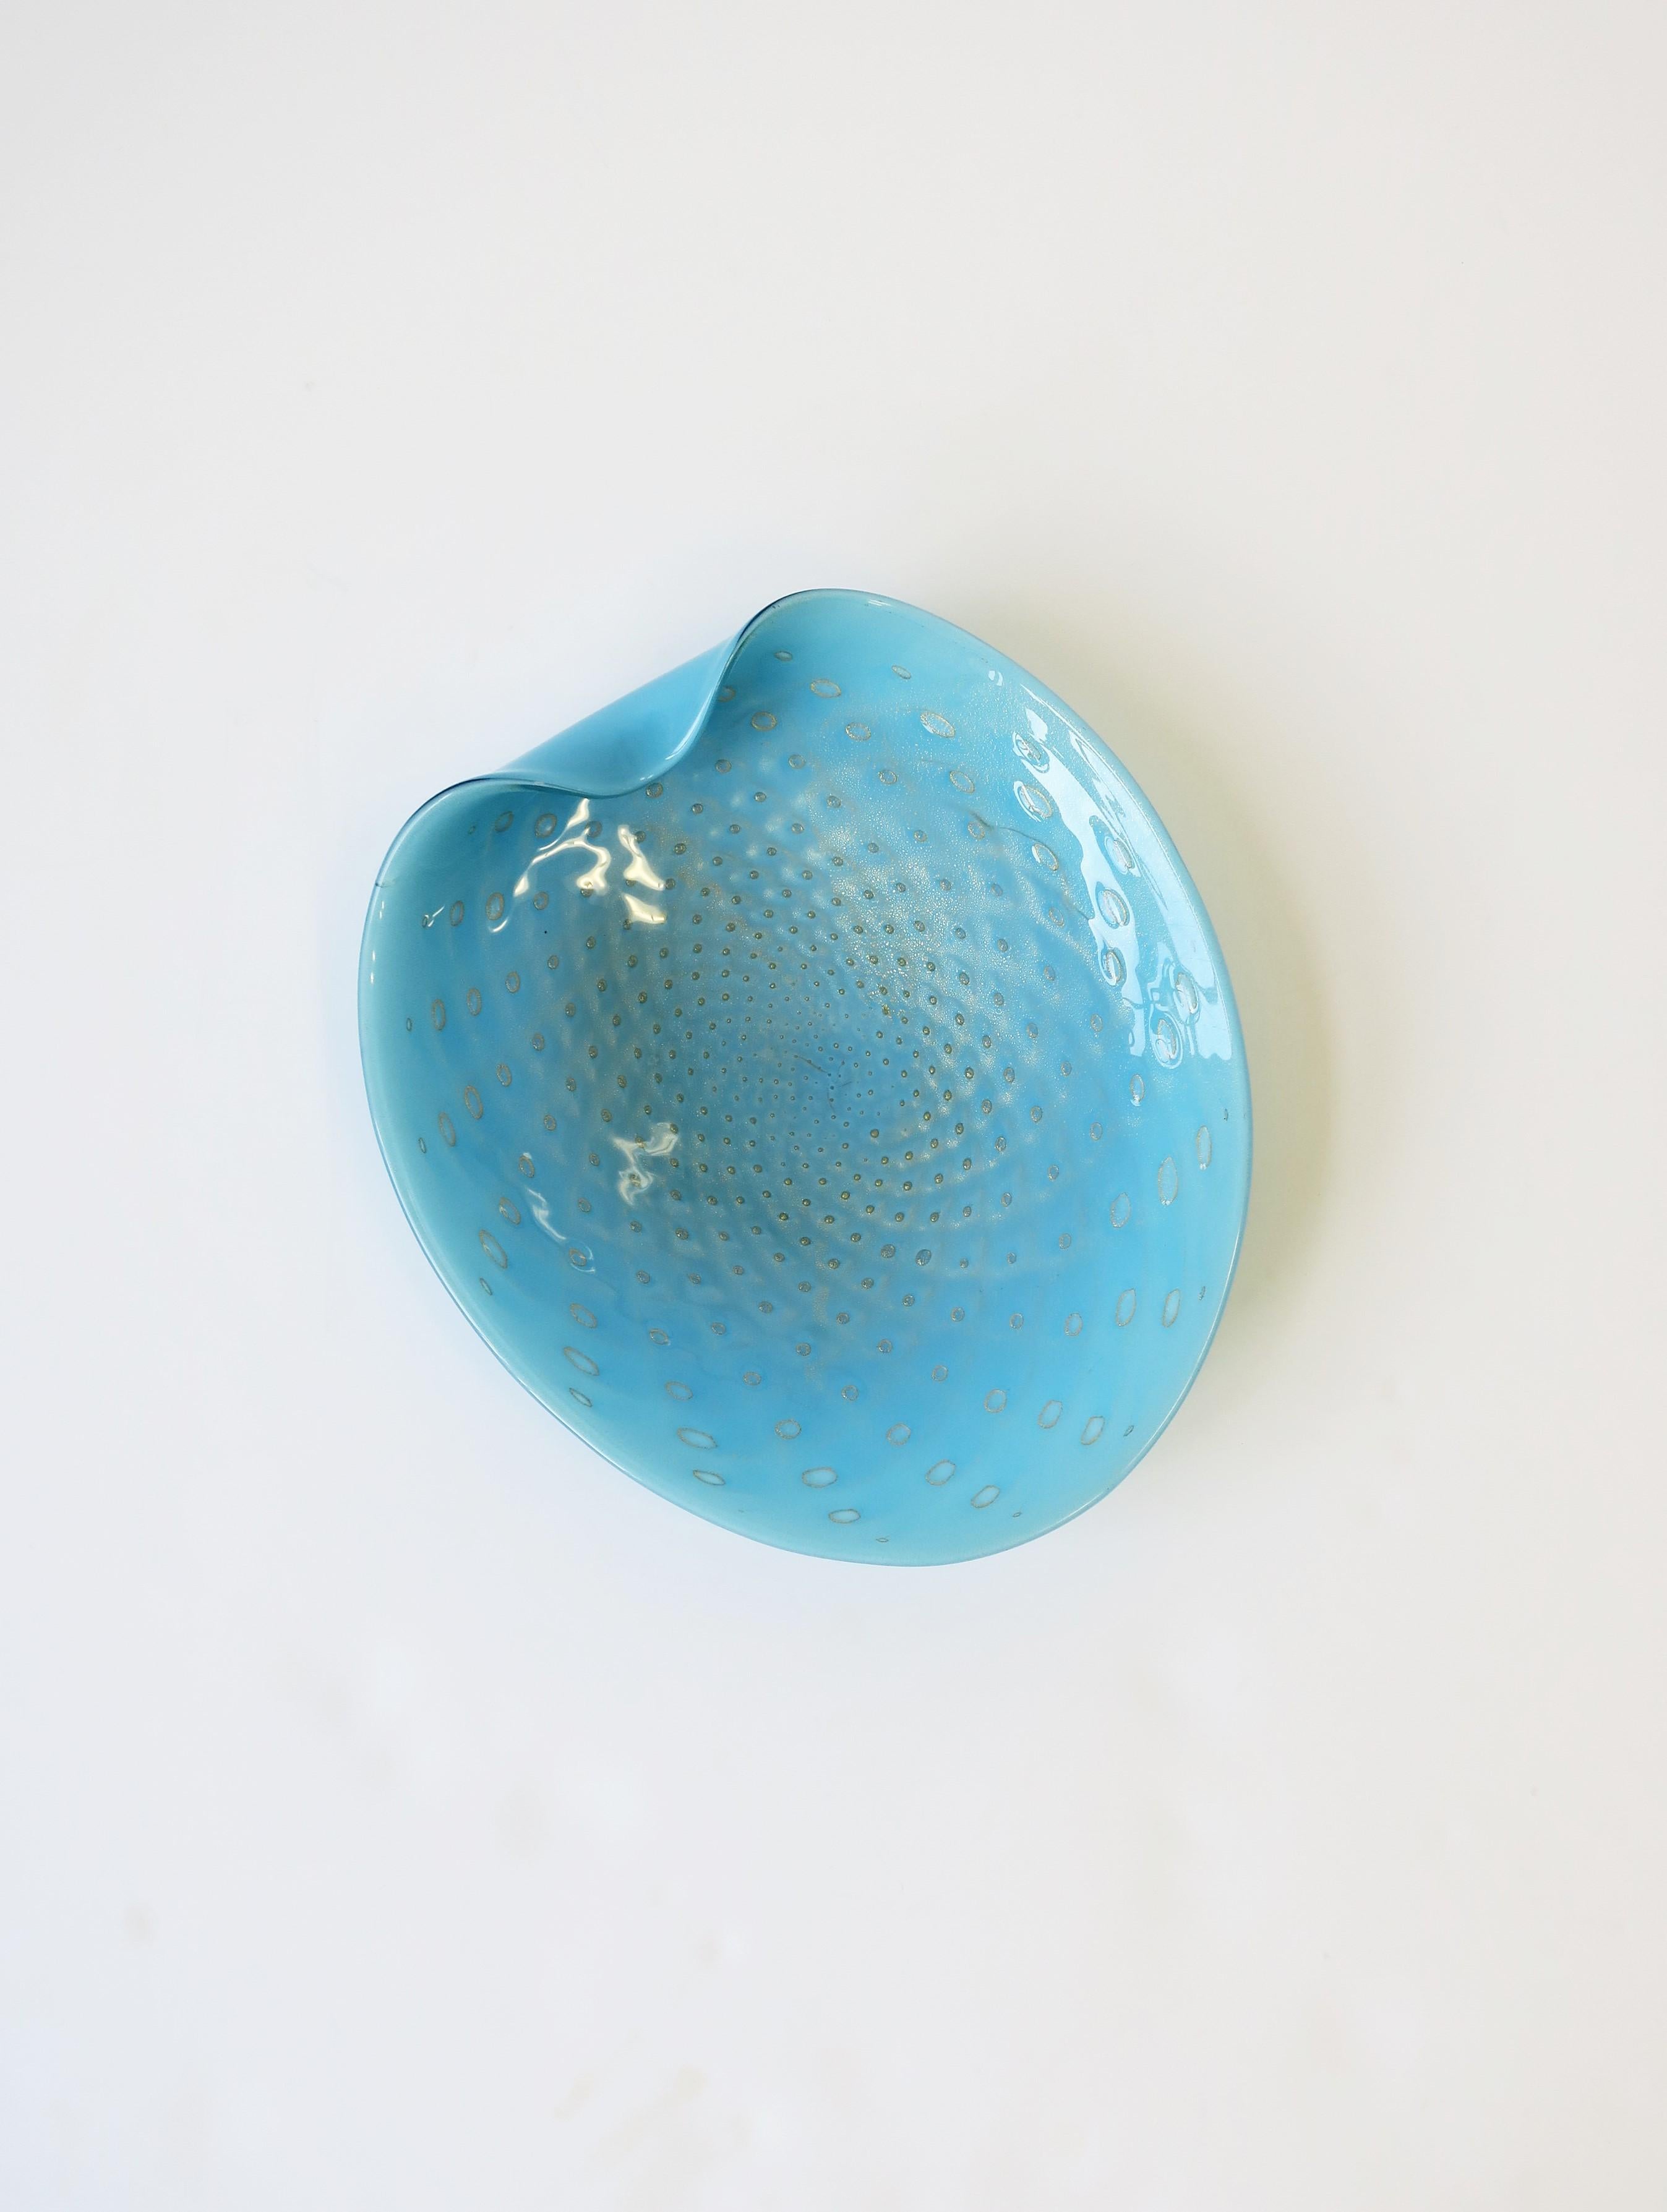 A beautiful vintage oval Mid-Century Modern Italian Murano baby blue and gold hand-blown art glass bowl with a 'controlled bubble' design, attributed to designer Alfredo Bambini, Italy, circa 1960s. Great as a standalone piece, catchall, candy dish,